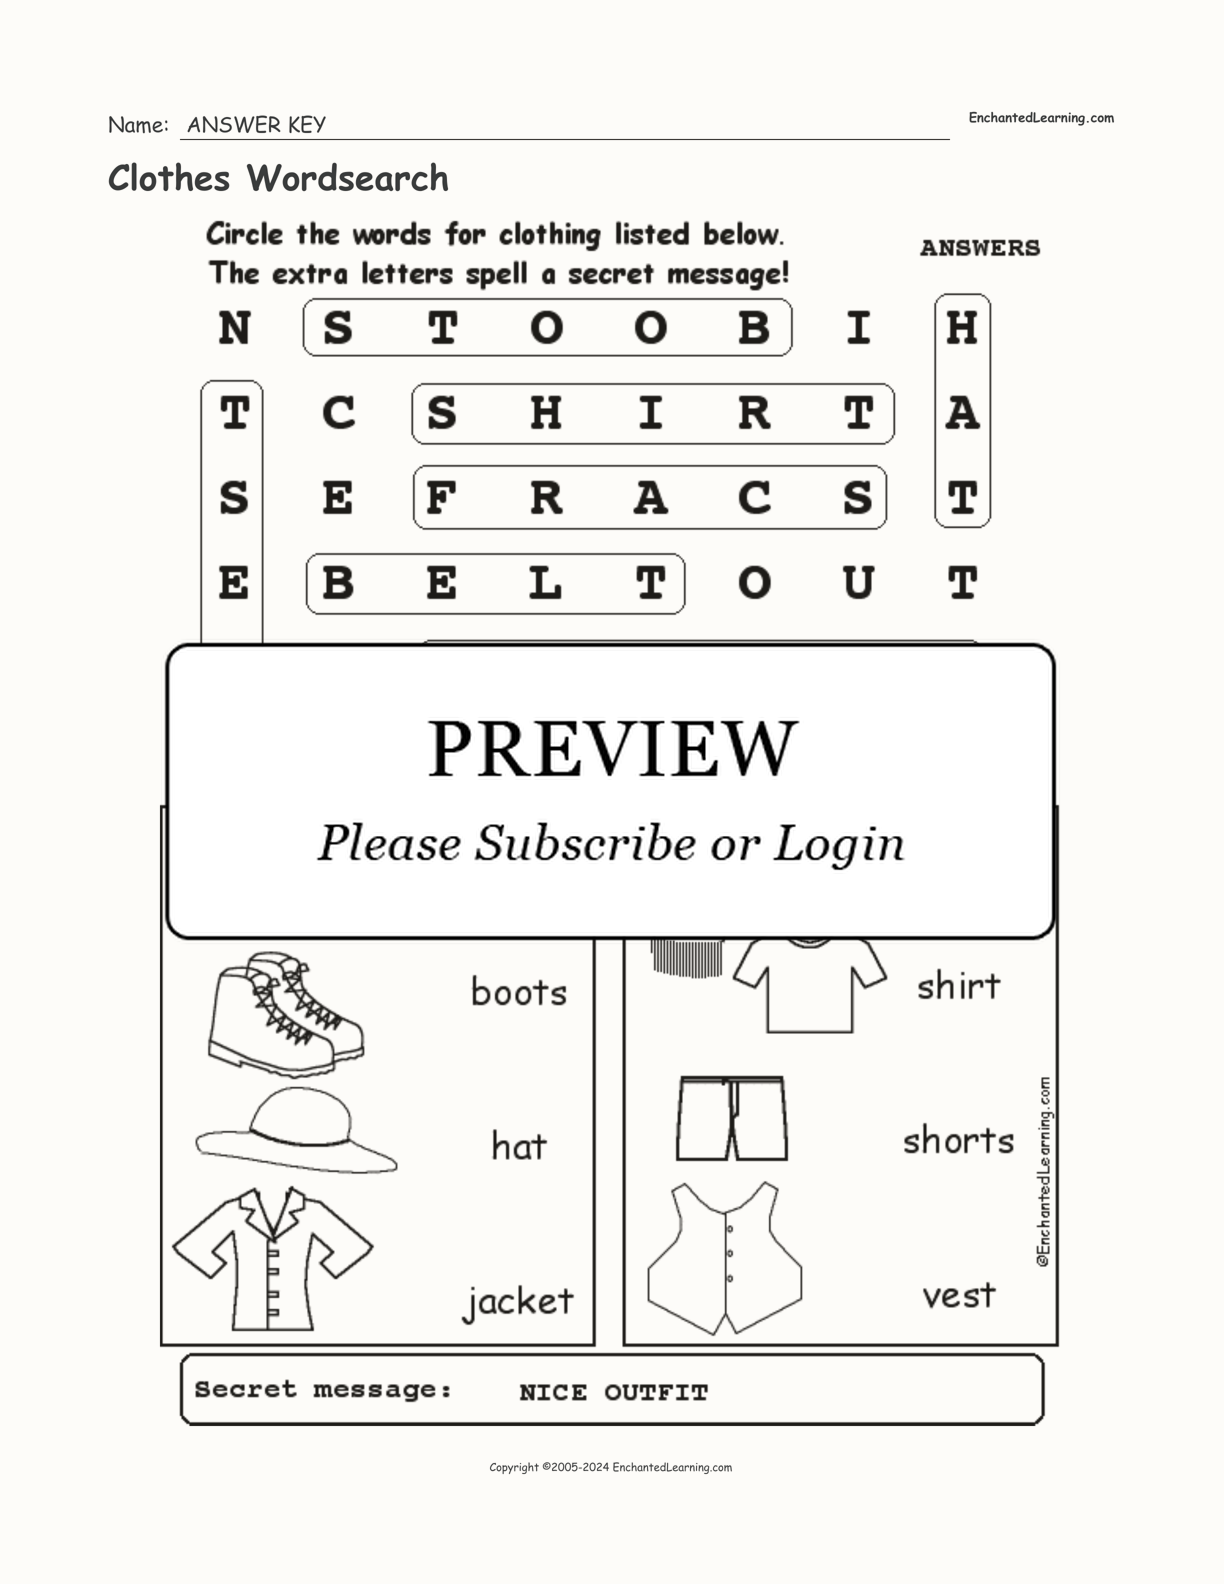 Clothes Wordsearch interactive worksheet page 2